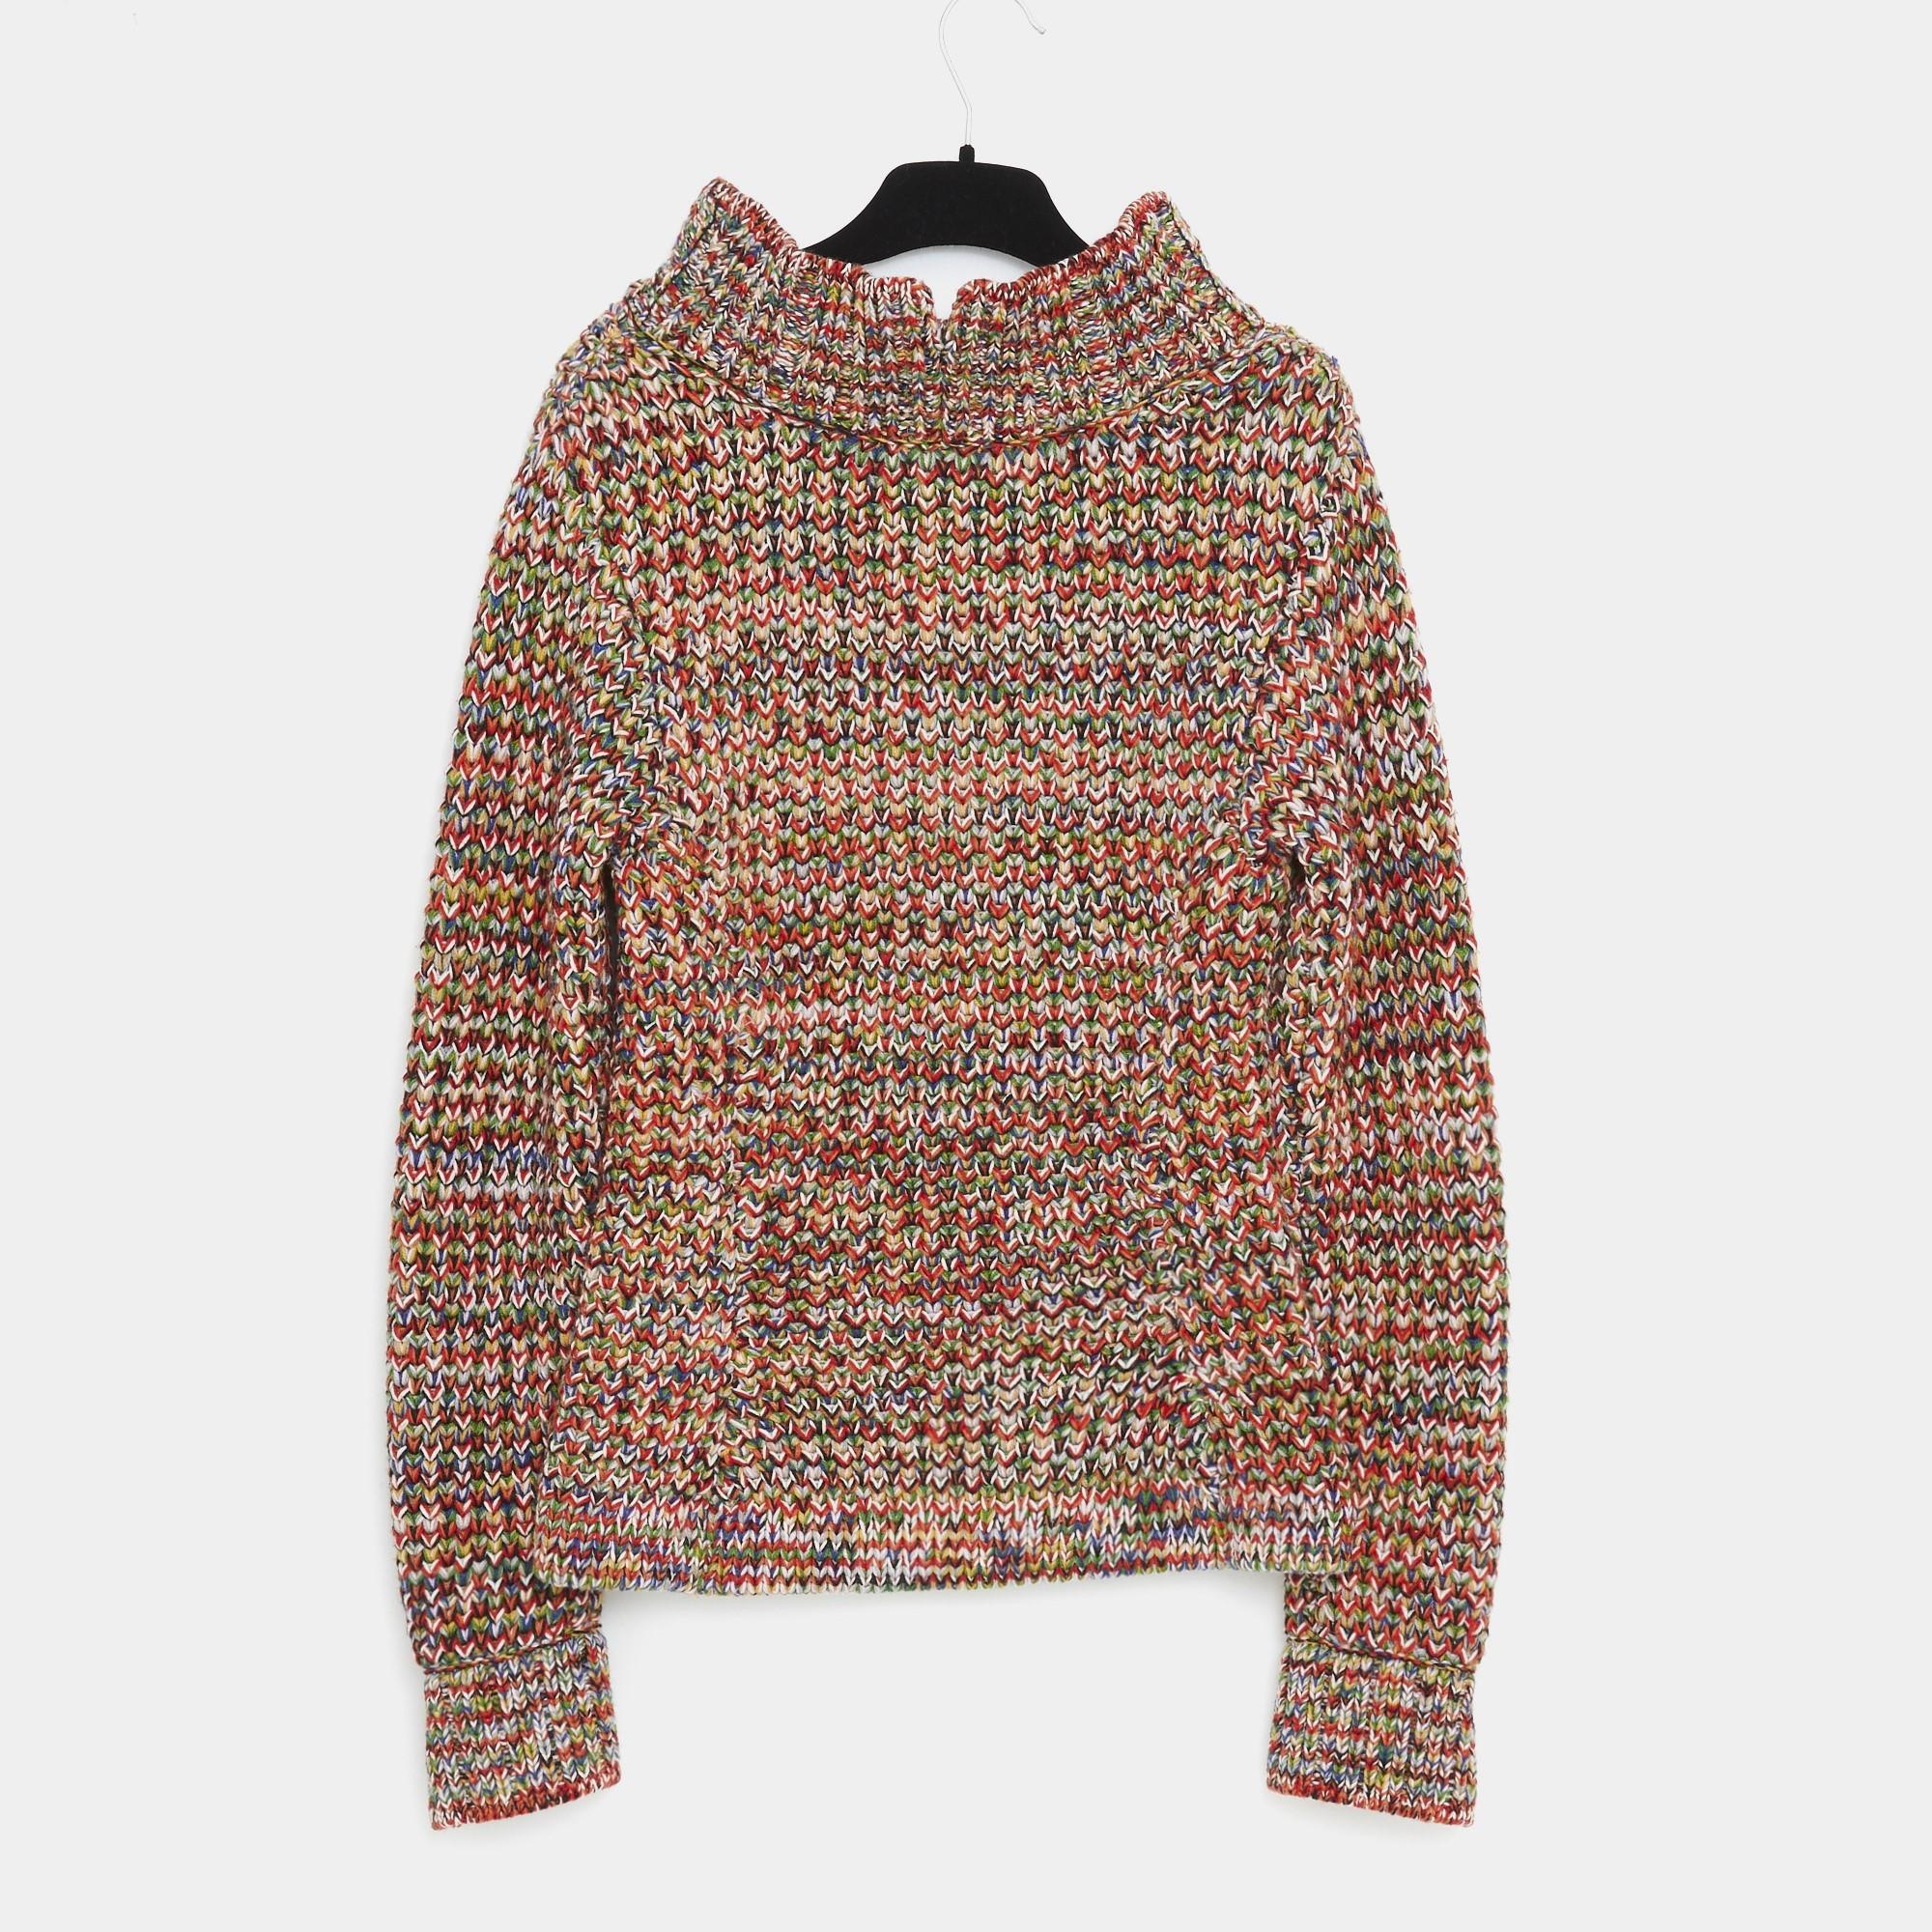 2013A Chanel Sweater FR36/38 Colorfull tweed 3